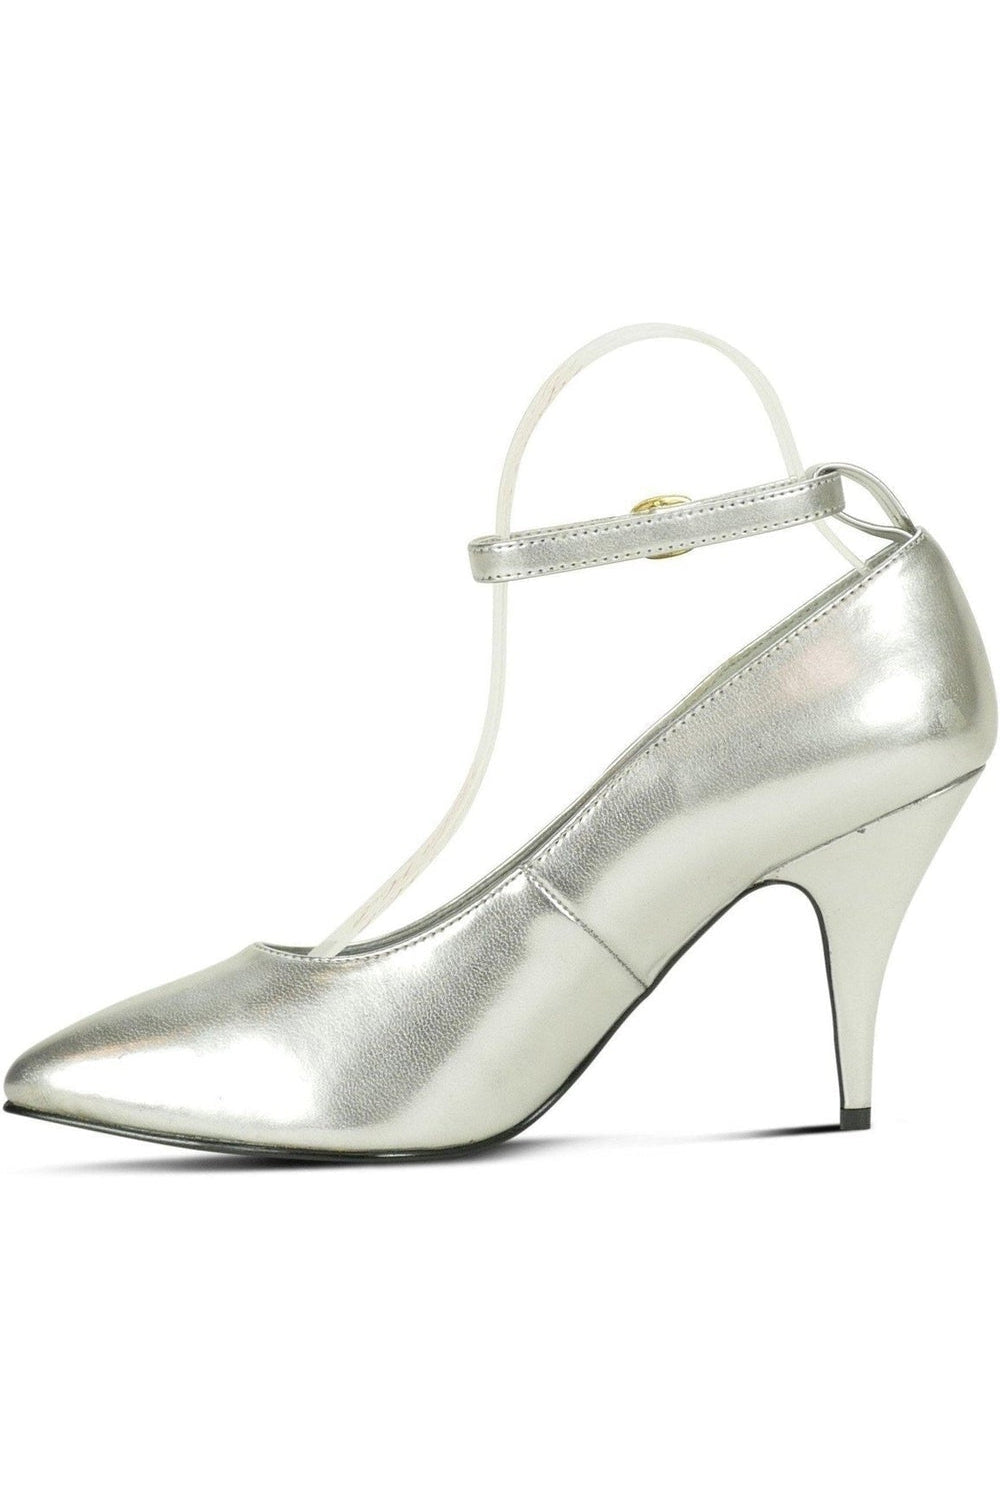 Ankle Strap - Silver-Sexyshoes Brand-Pumps-SEXYSHOES.COM